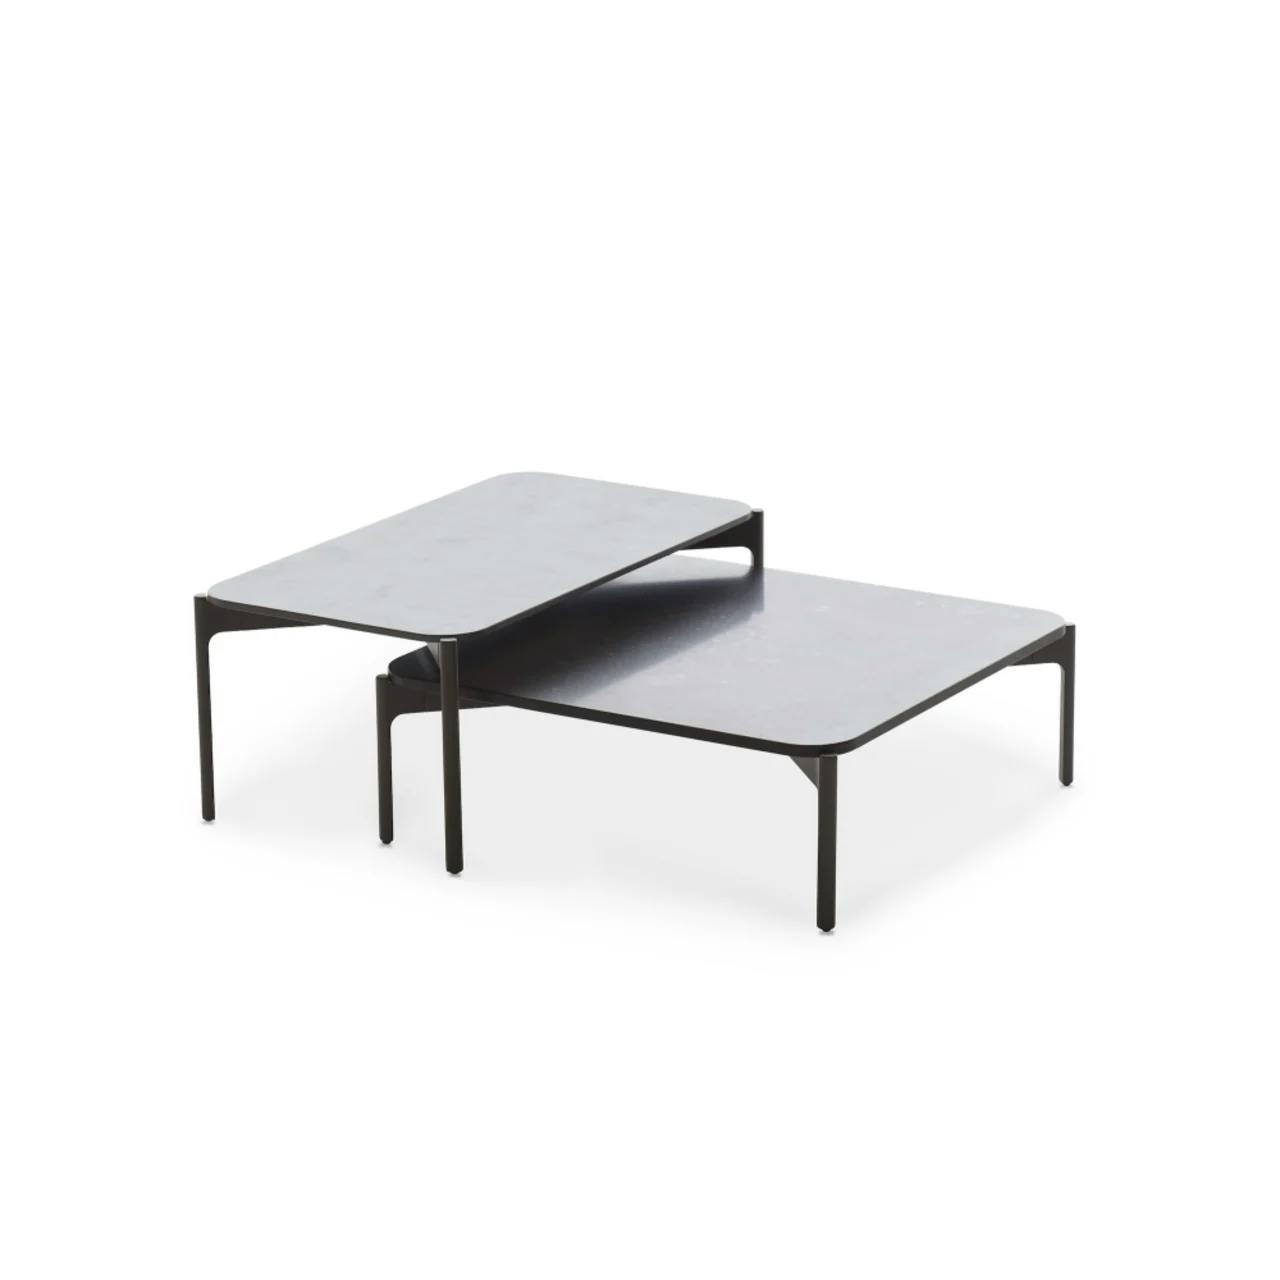 Overlapping Coffee Tables [Black Pepper and Lava Mineral Composite] (Courtesy of DEDON)